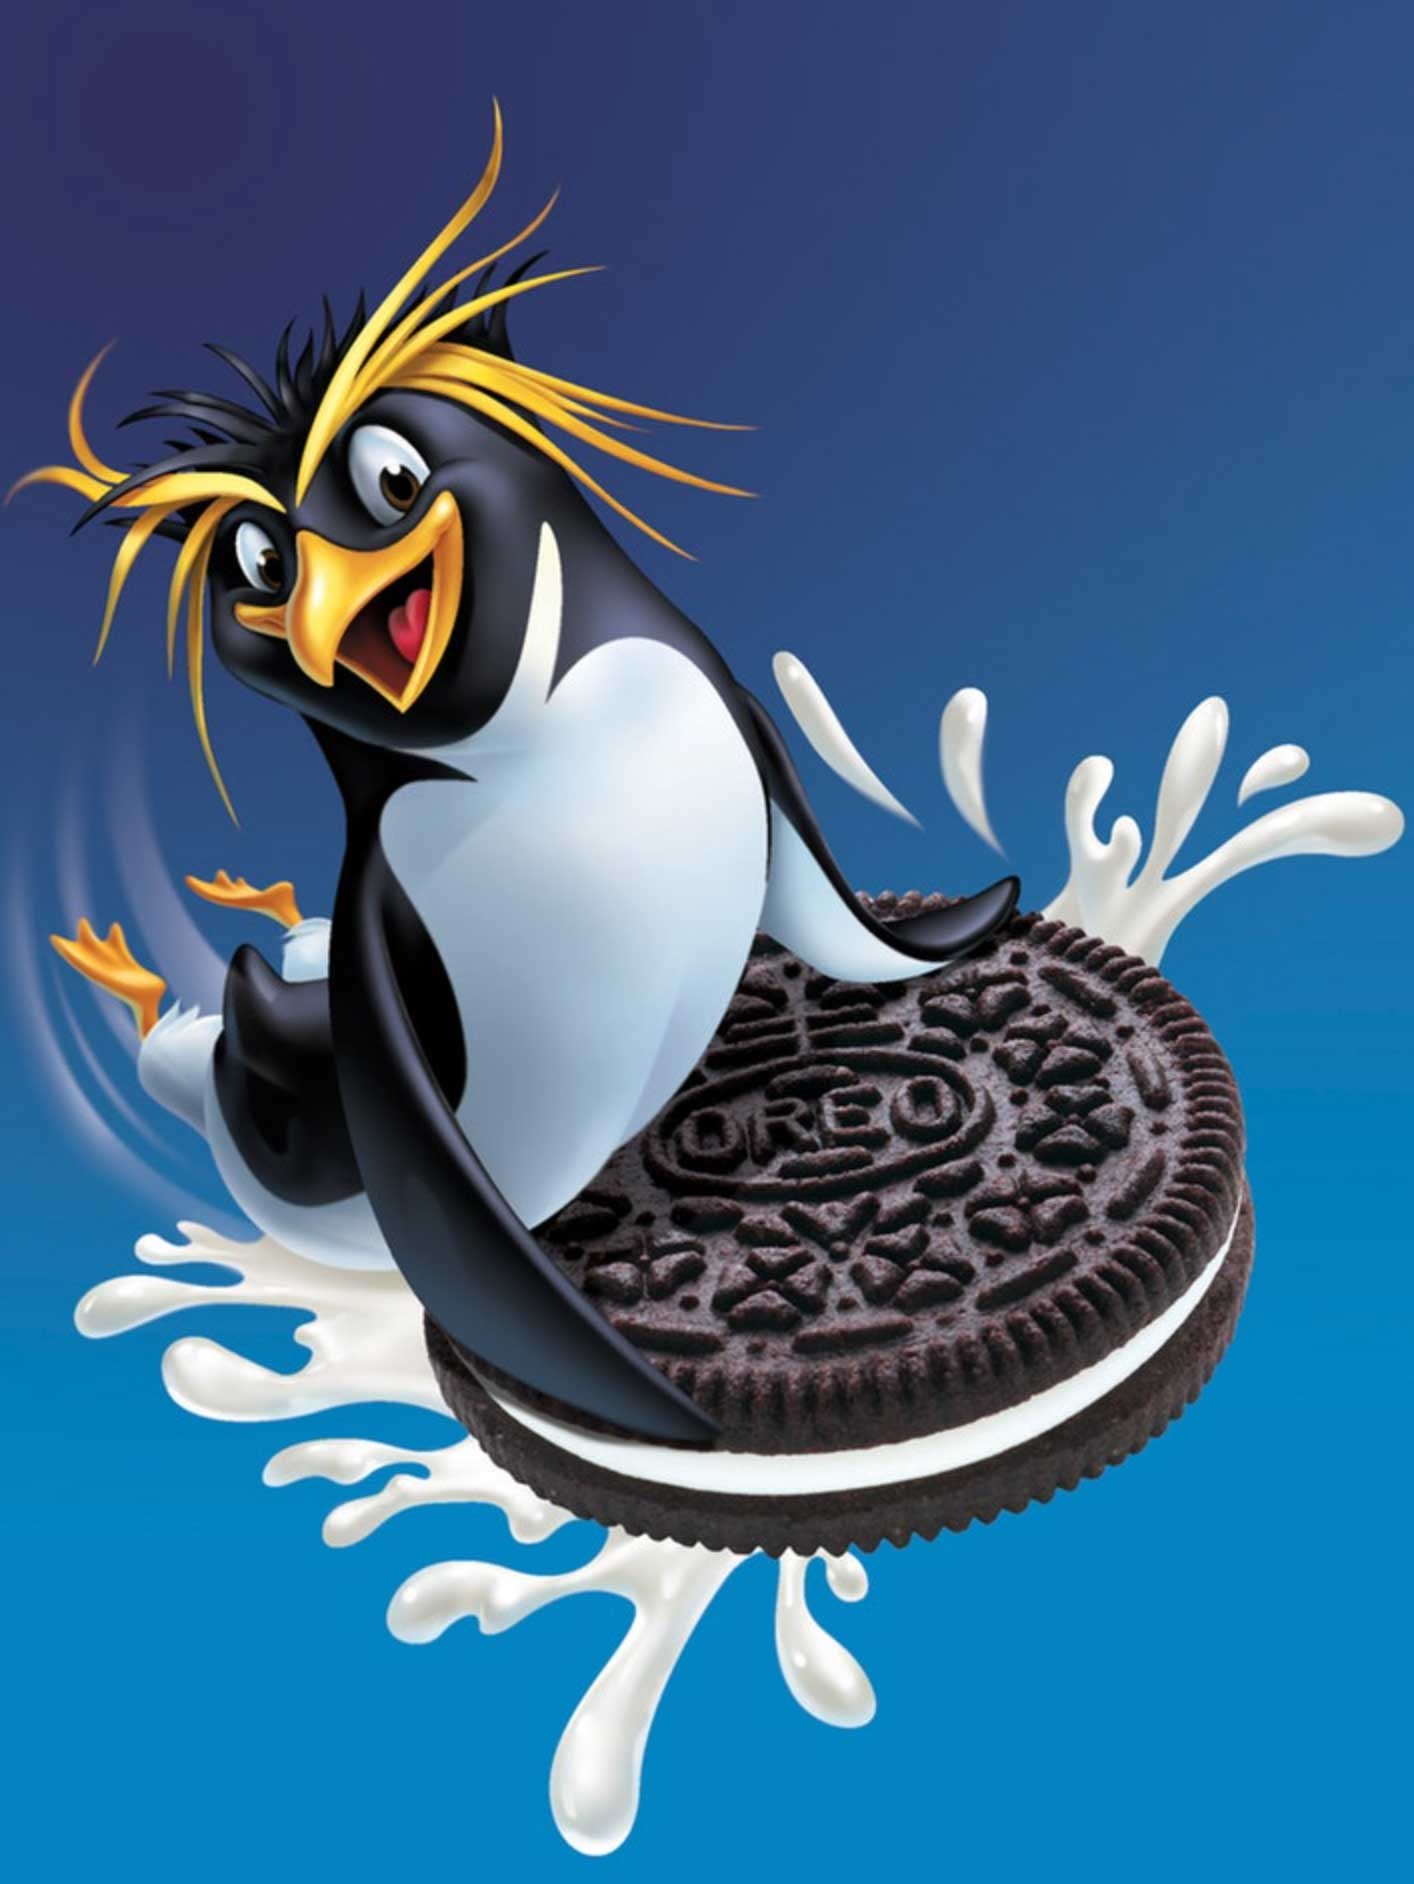 Oreo-Cookies-with-Milk-Splash-and-Penquin-Character